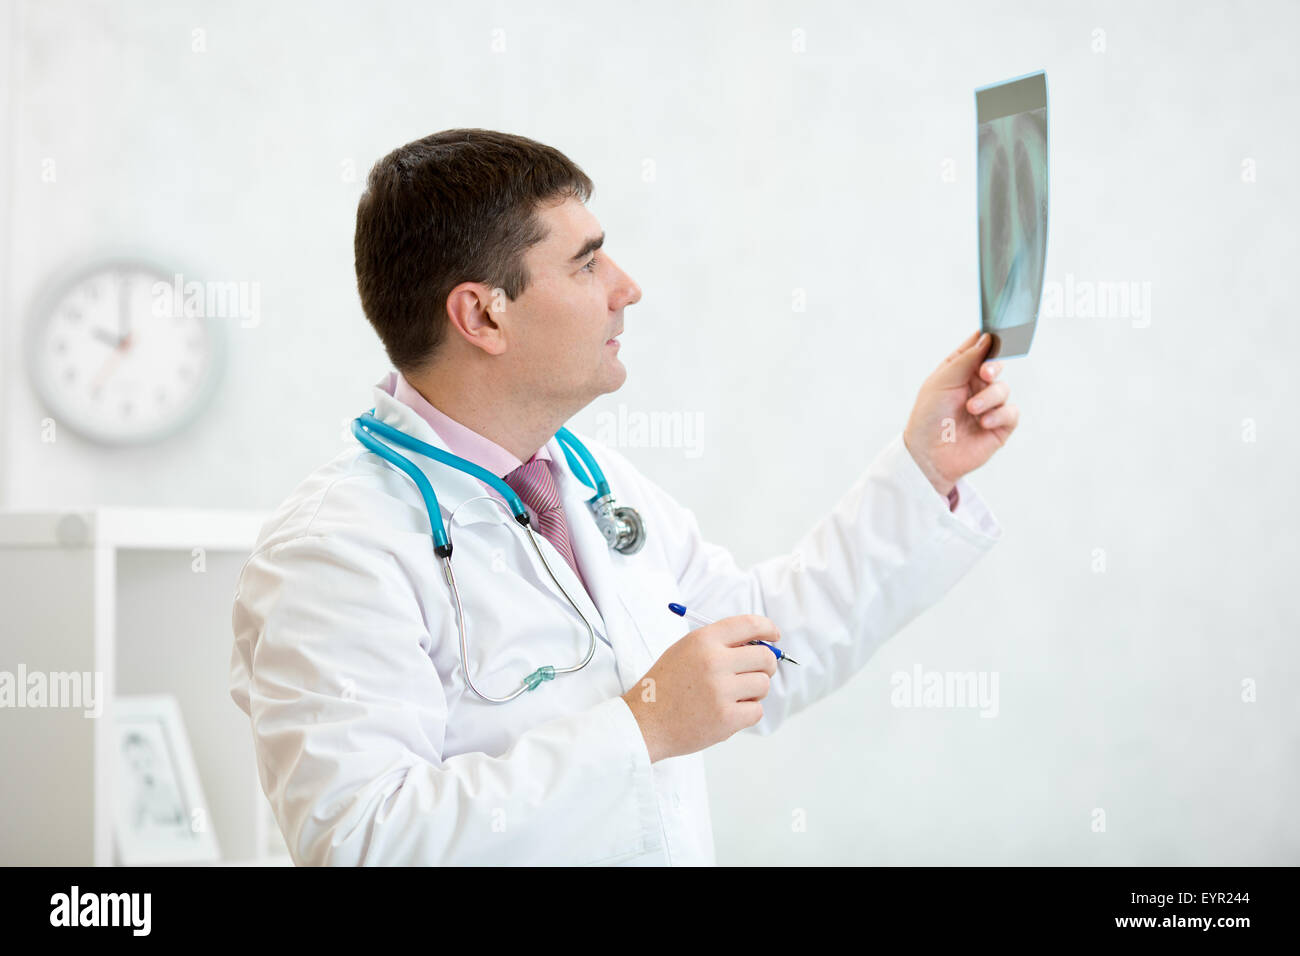 Doctor examining a lung radiography Stock Photo